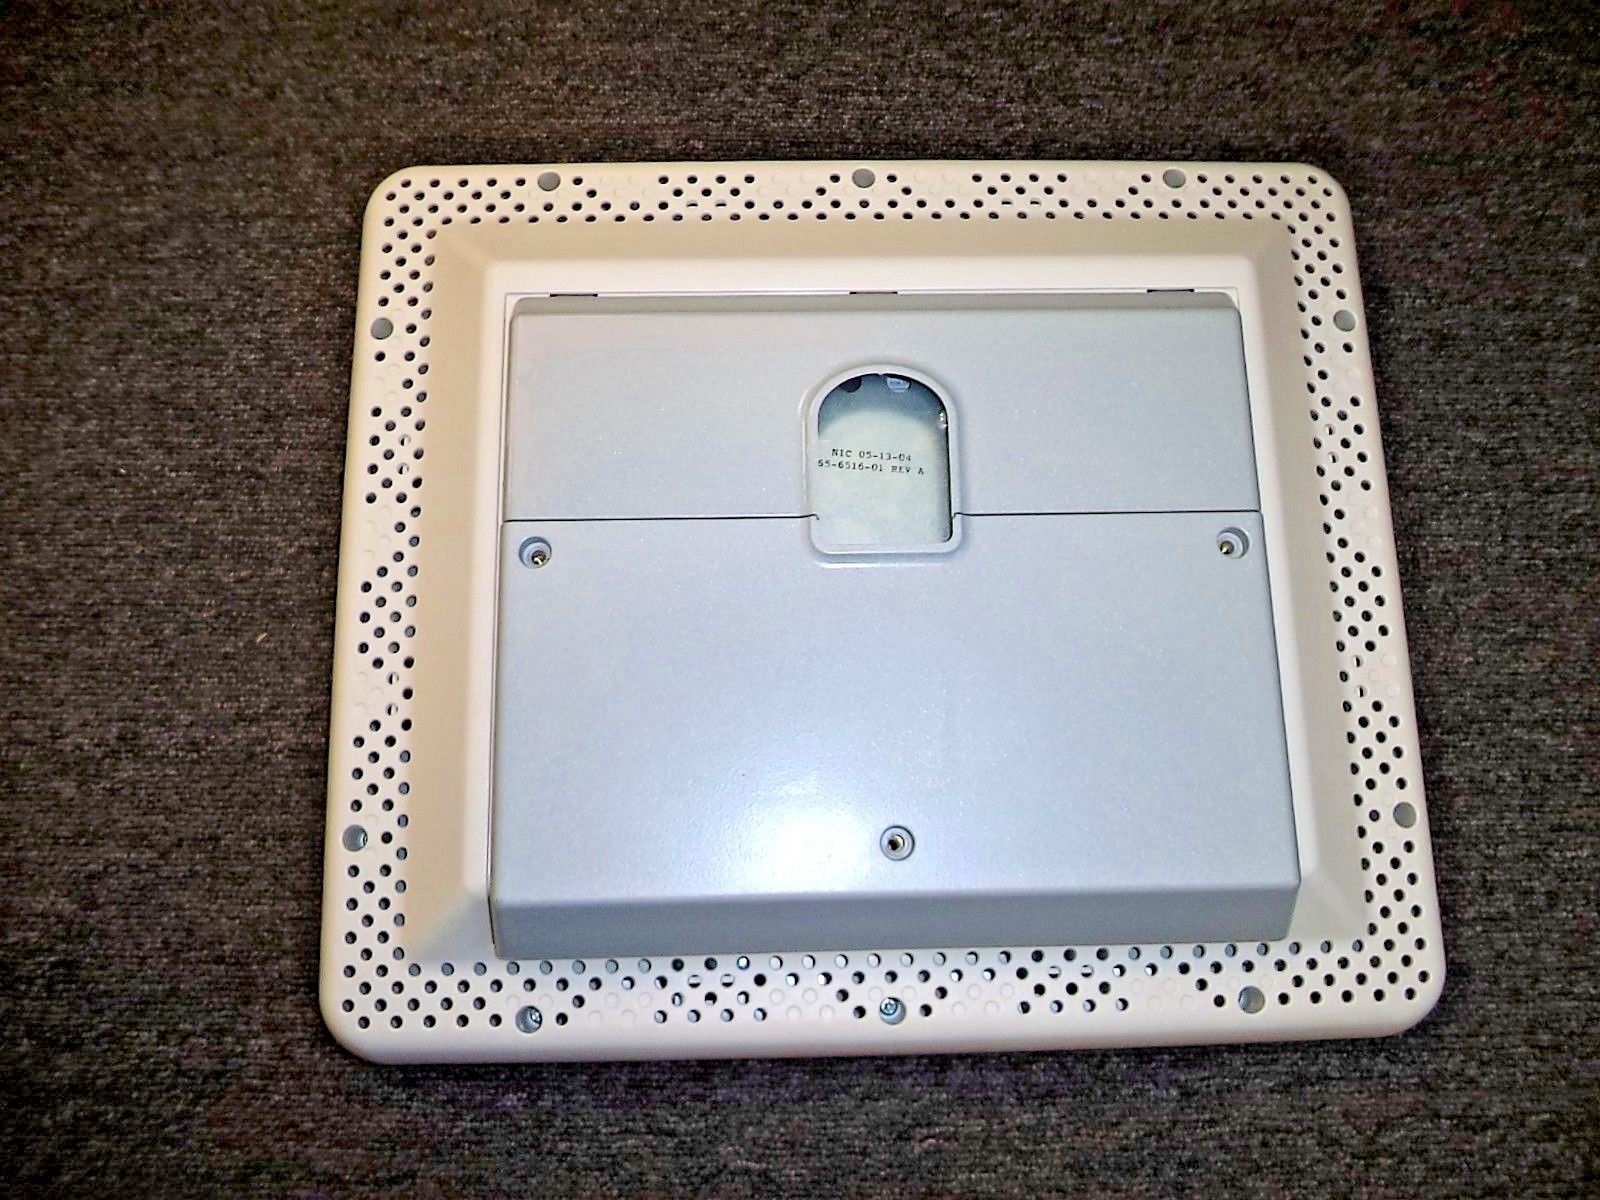 a white electronic device sitting on top of a carpet